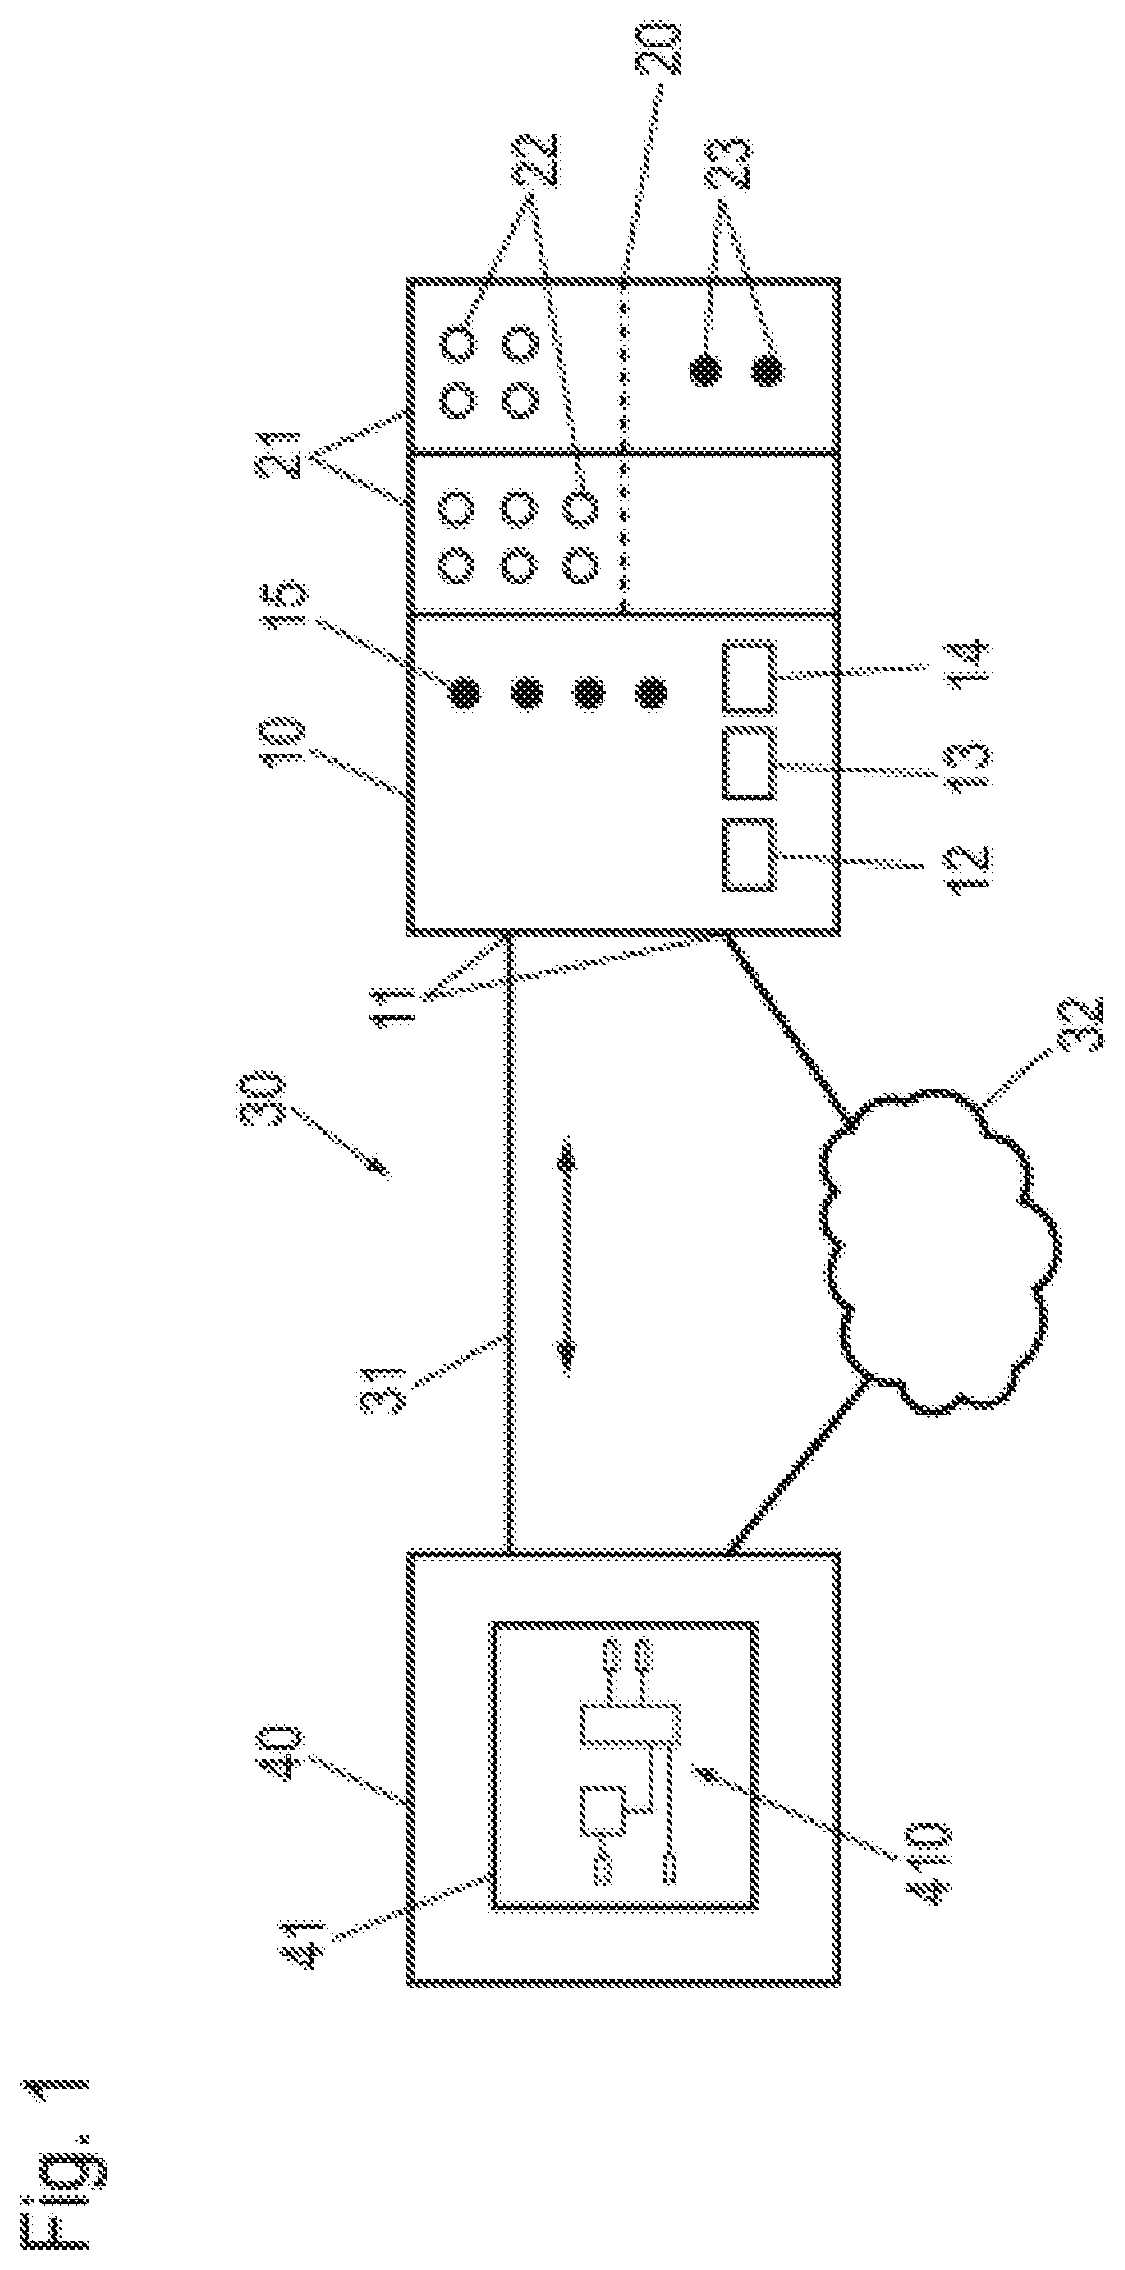 Control system for an industrial automation facility and method for programming and operating such a control system